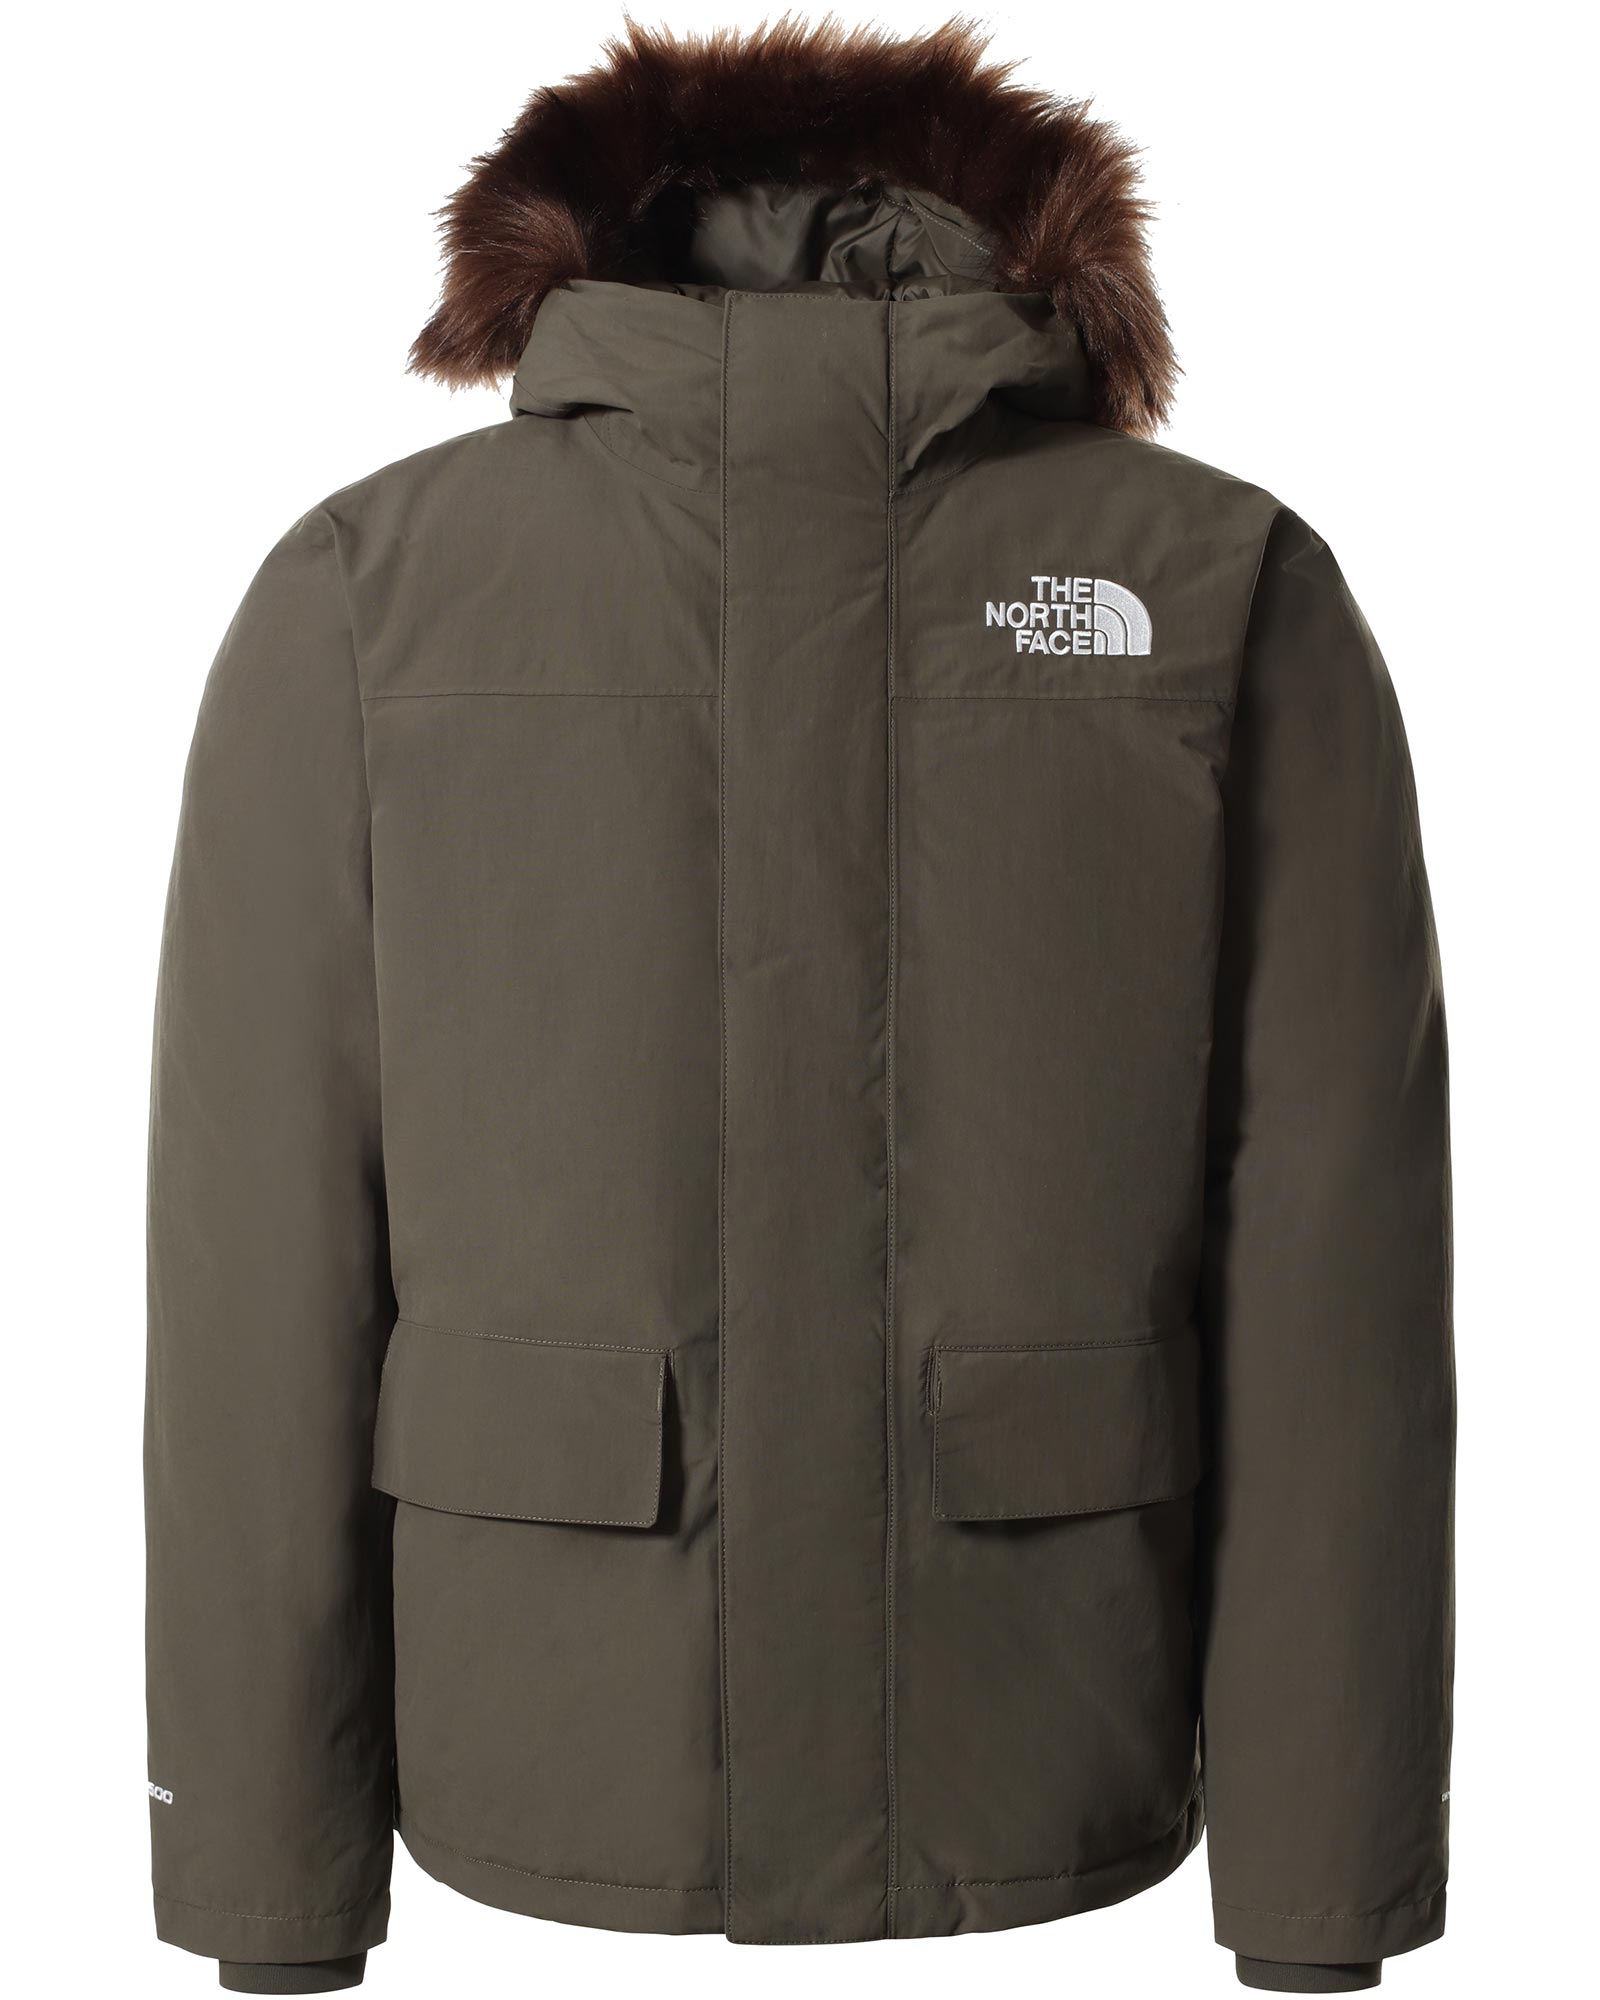 The North Face Arctic Men’s Parka Jacket - New Taupe Green XS